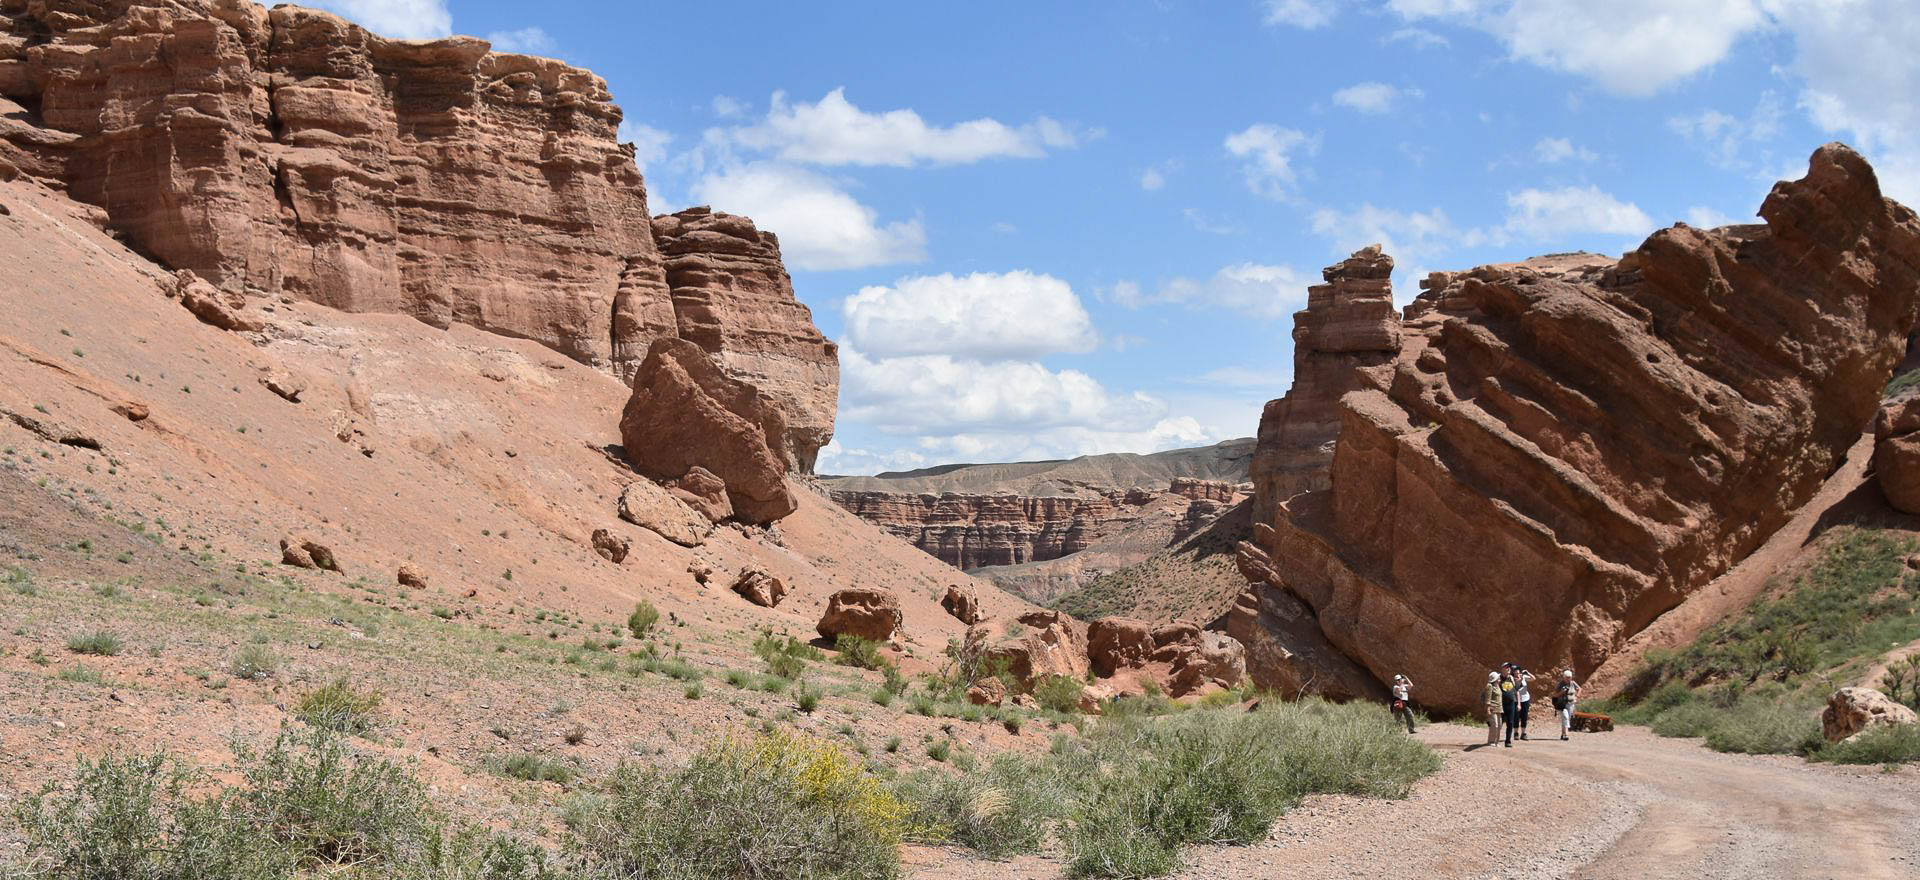 Walking through the Charyn Canyon - Kazakhstan Holidays and Tours